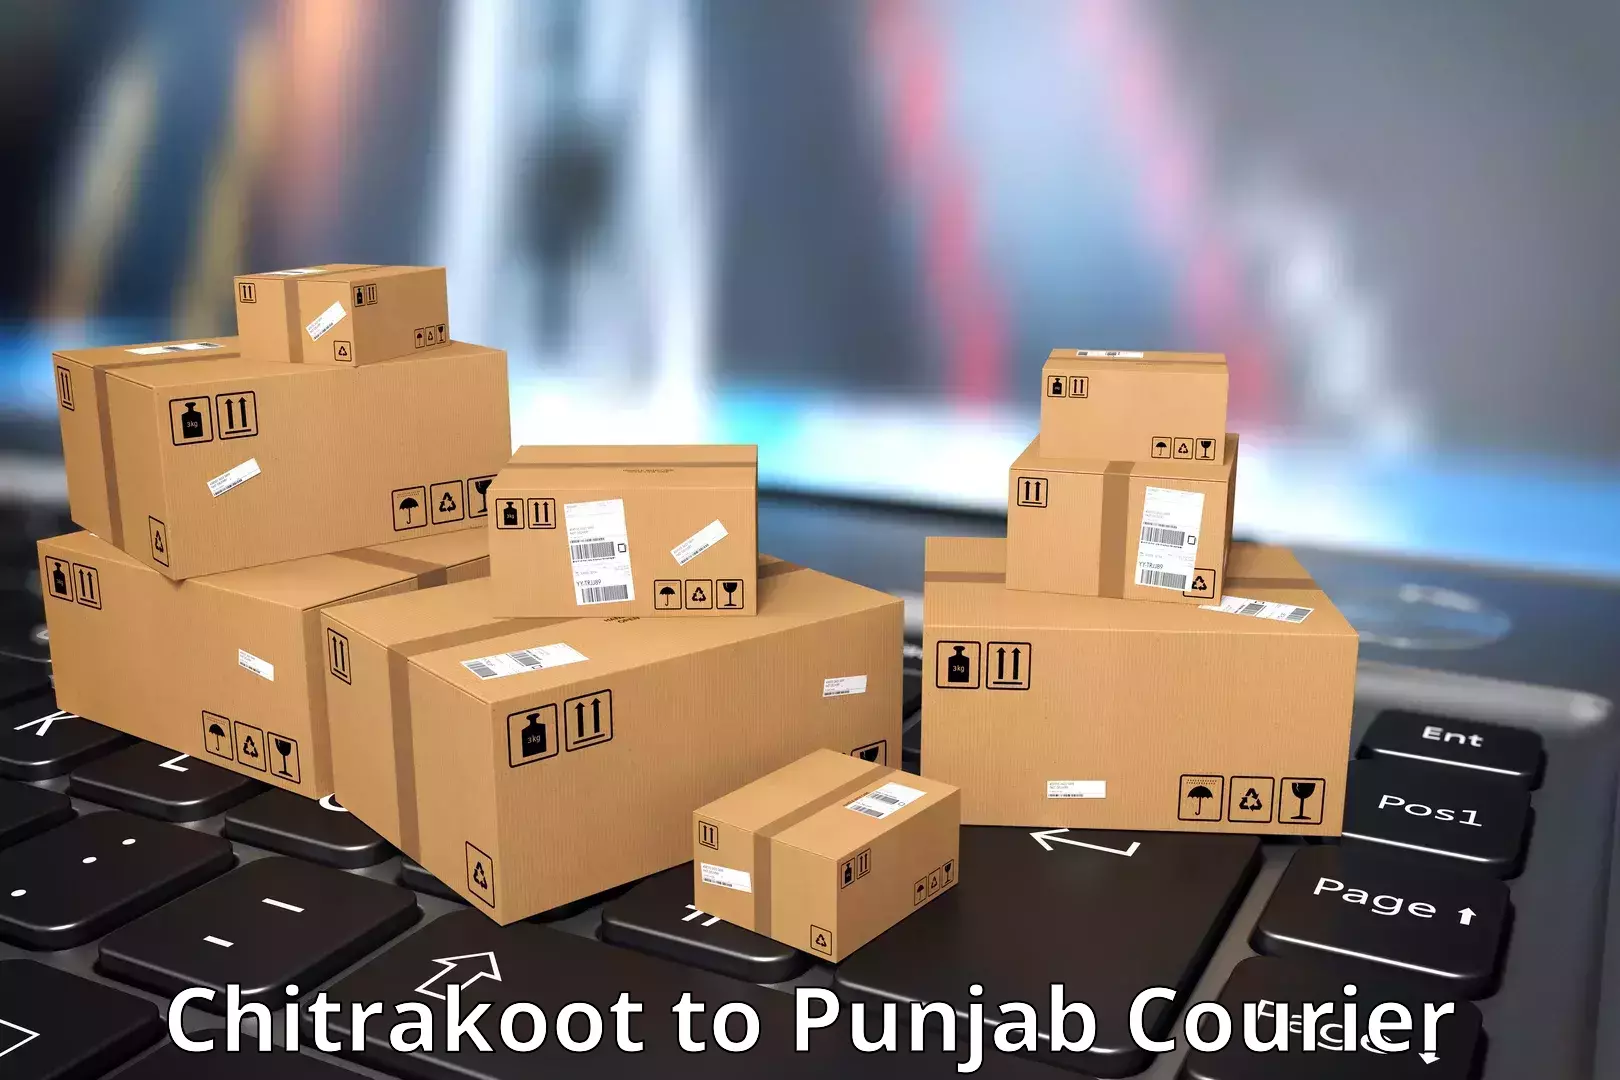 Punctual parcel services Chitrakoot to Faridkot